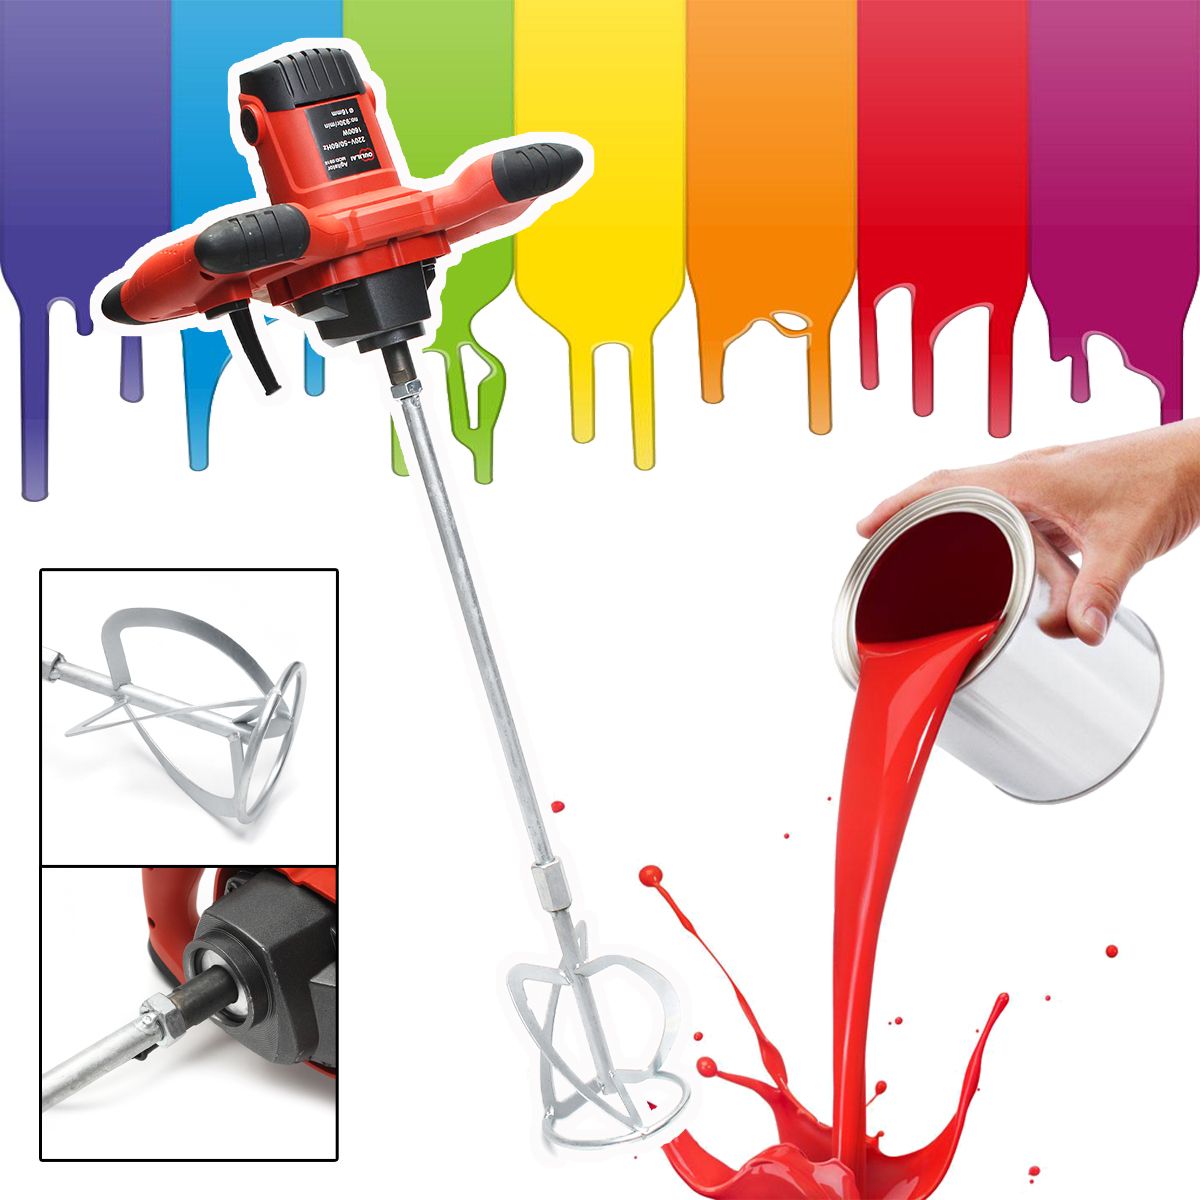 Electric-Mortar-Mixer-1600W-Dual-High-Low-Gear-6-Speed-Paint-Cement-Grout-Blender-1363111